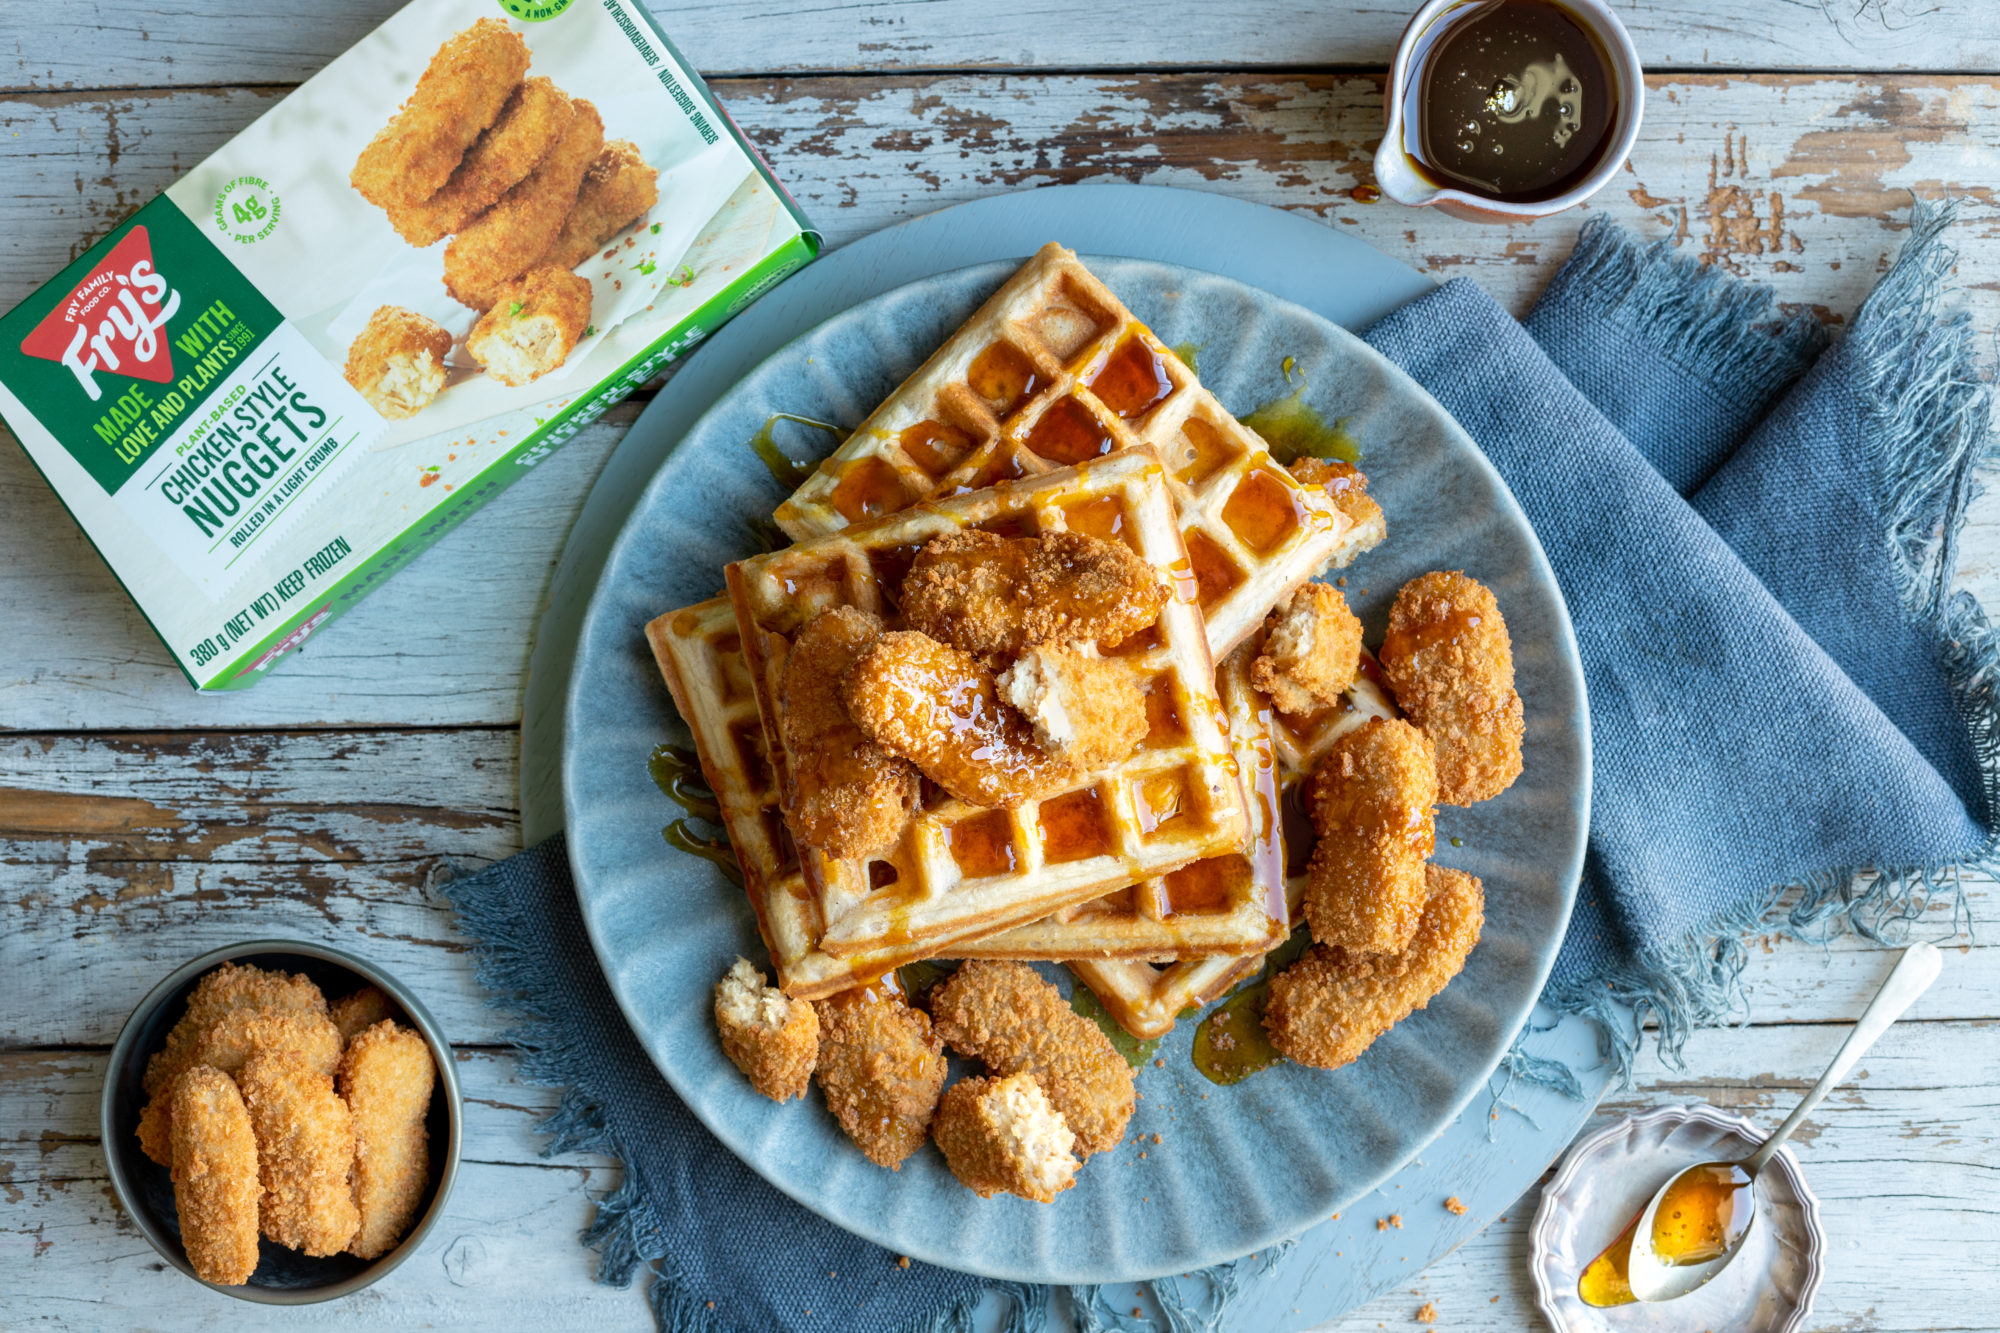 Fry's Chick style nuggets with waffles